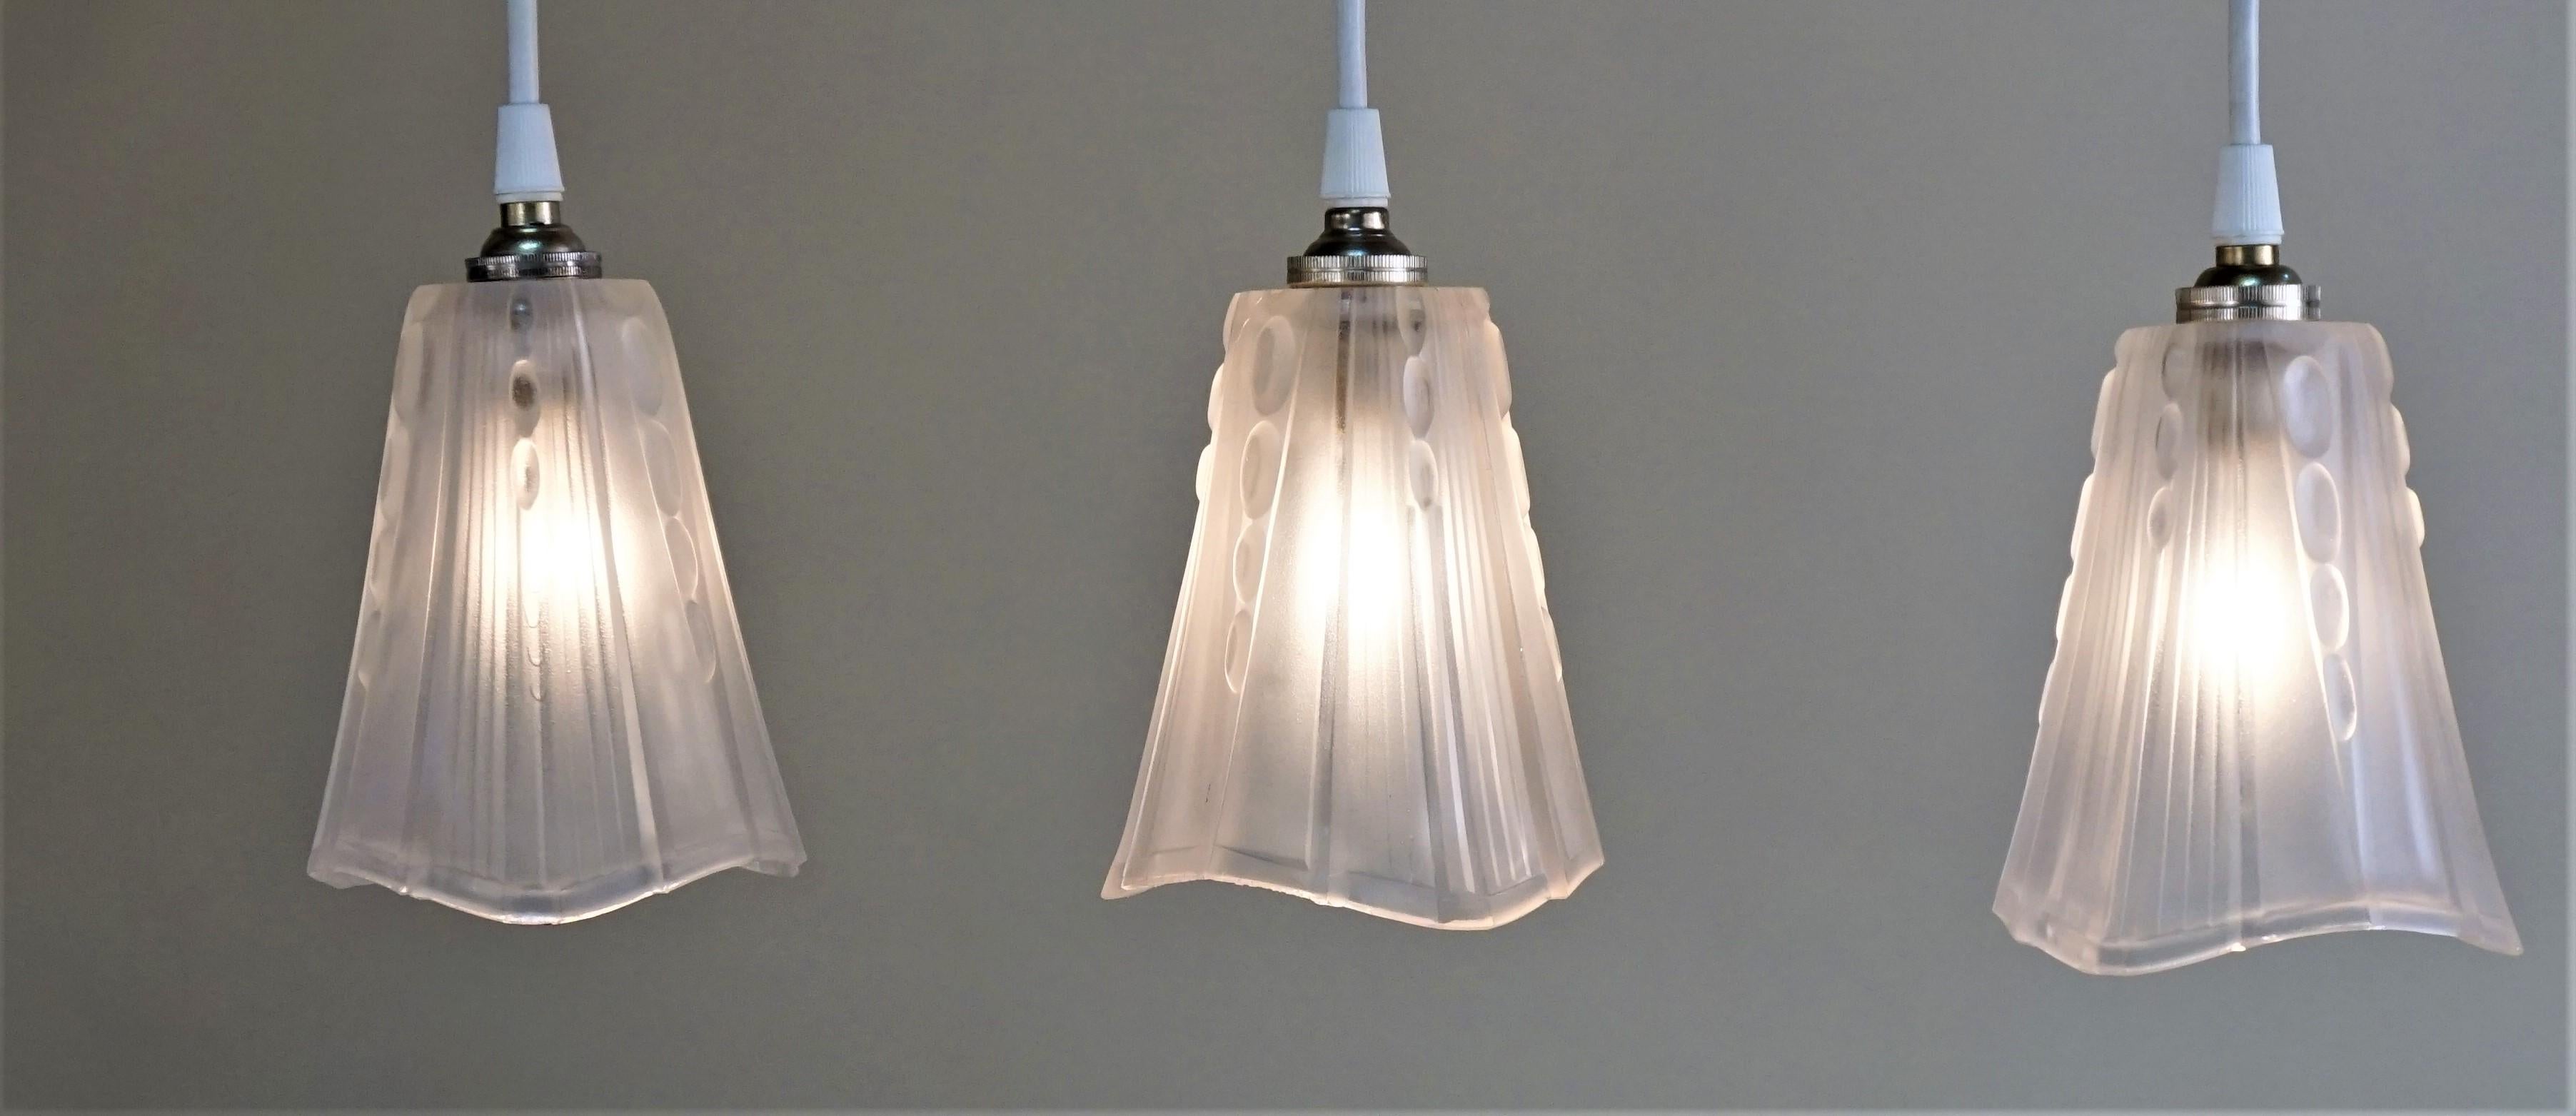 Set of Three 1930s Art Deco Glass Shade Pendant Light by E.J.G. In Good Condition For Sale In Fairfax, VA